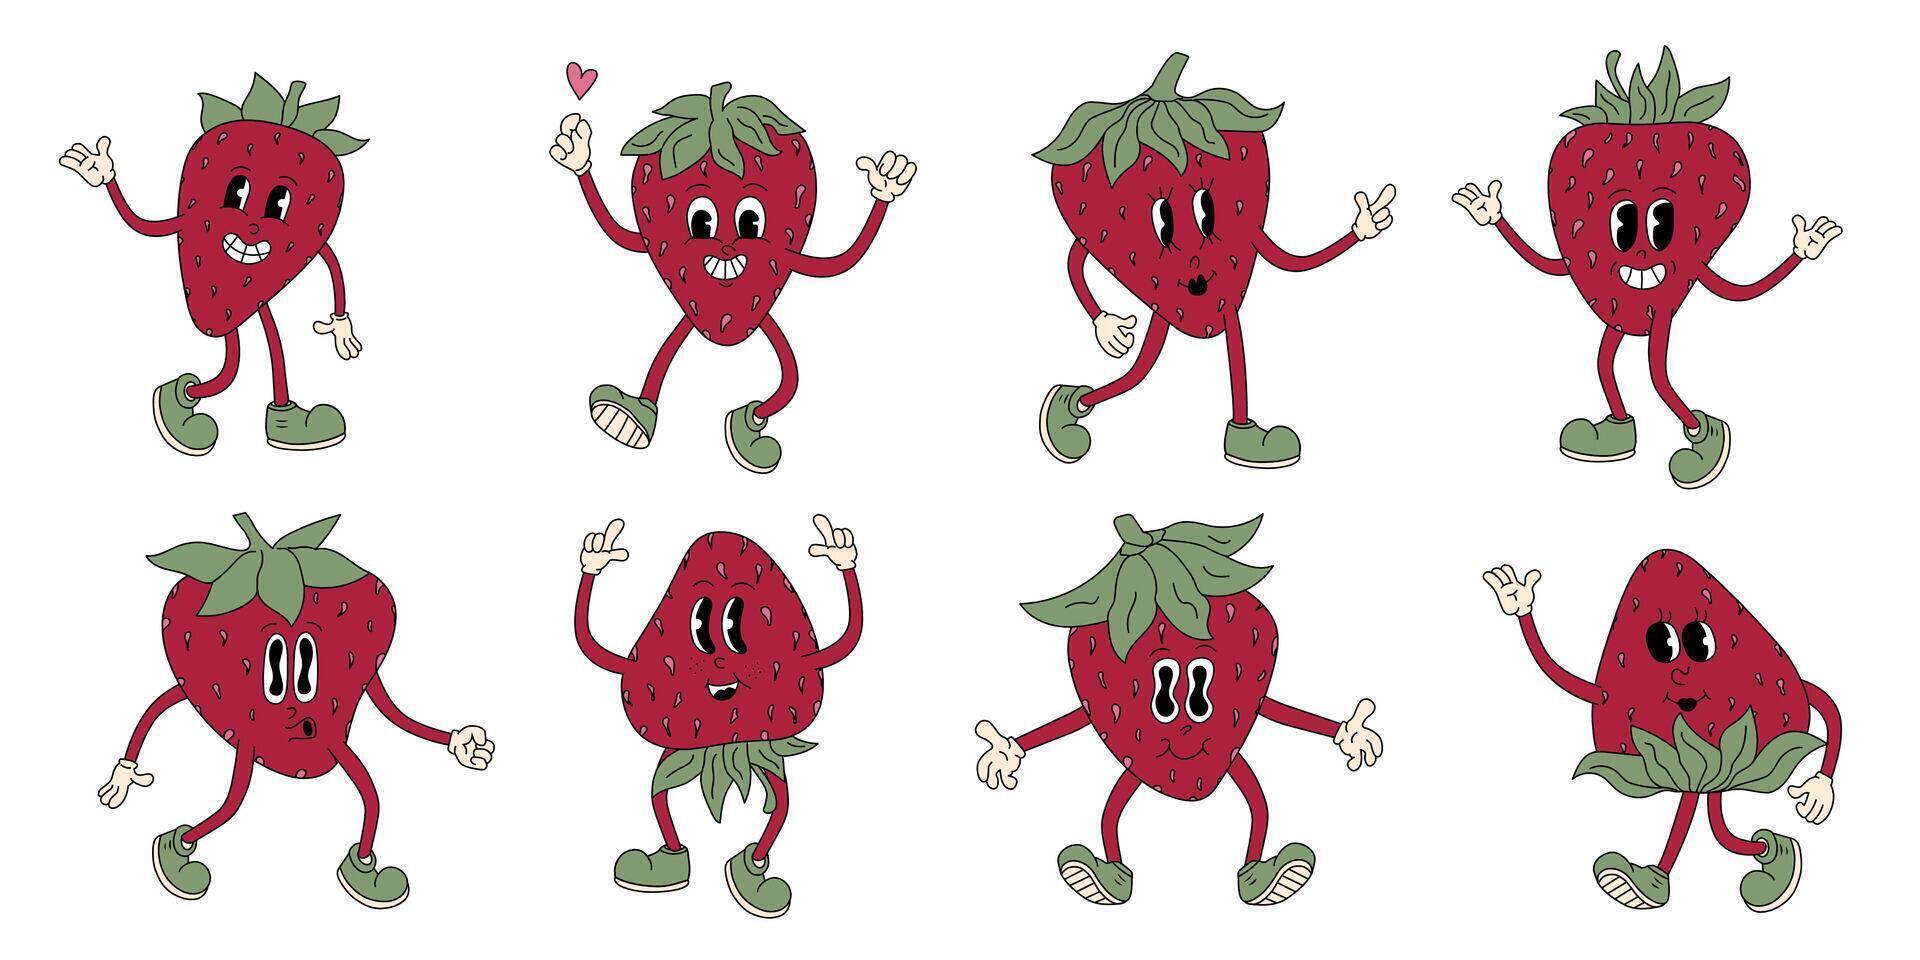 Groovy strawberry retro summer berry fruit set. Vector vintage fun strawberry characters illustration.